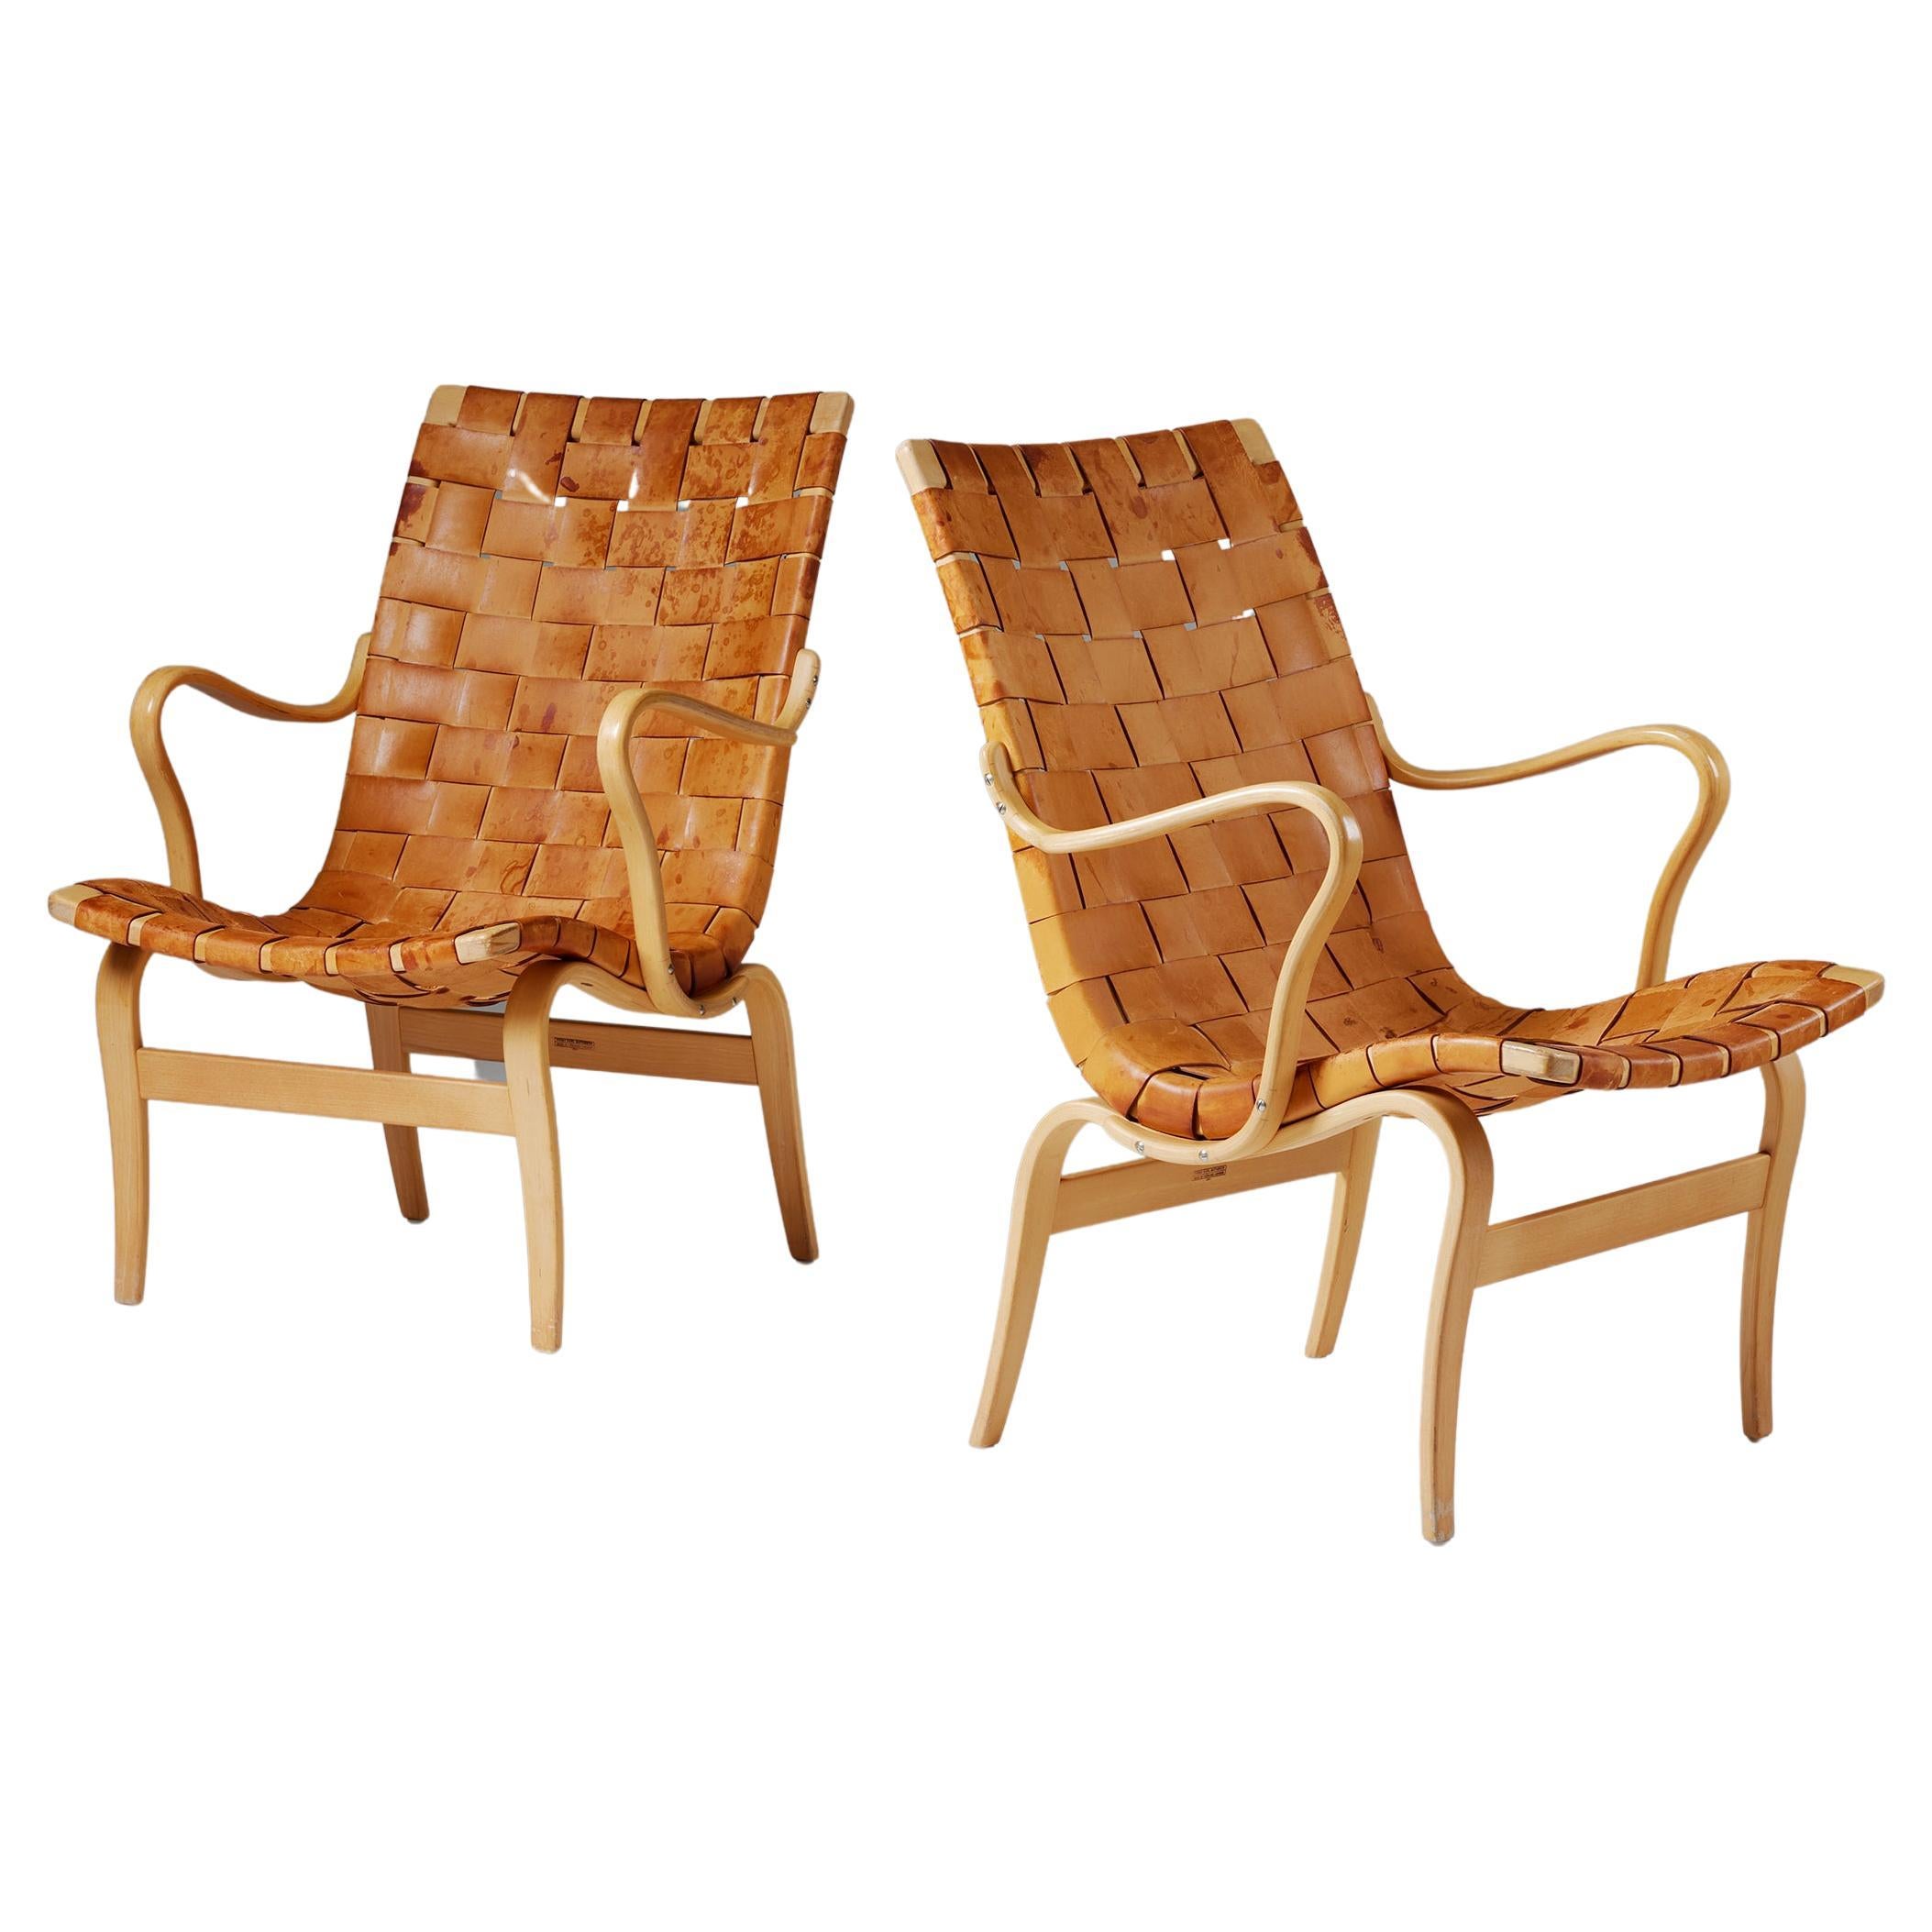 Pair of armchairs ‘Eva’ designed by Bruno Mathsson for Karl Mathsson, Swedish For Sale